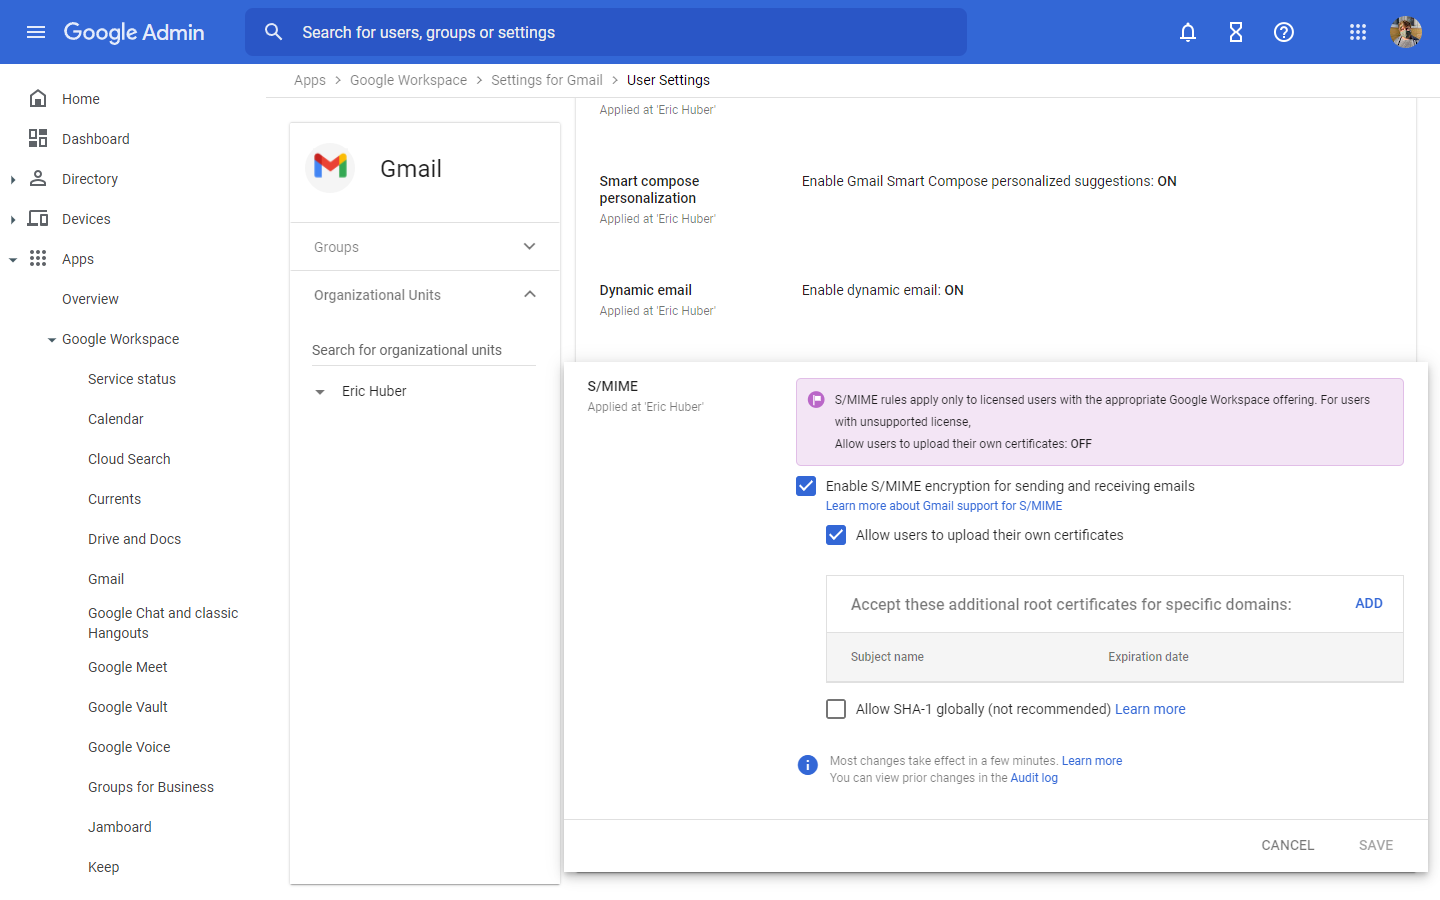 Picture of Google Admin "Settings for Gmail" user settings with S/MIME options turned on